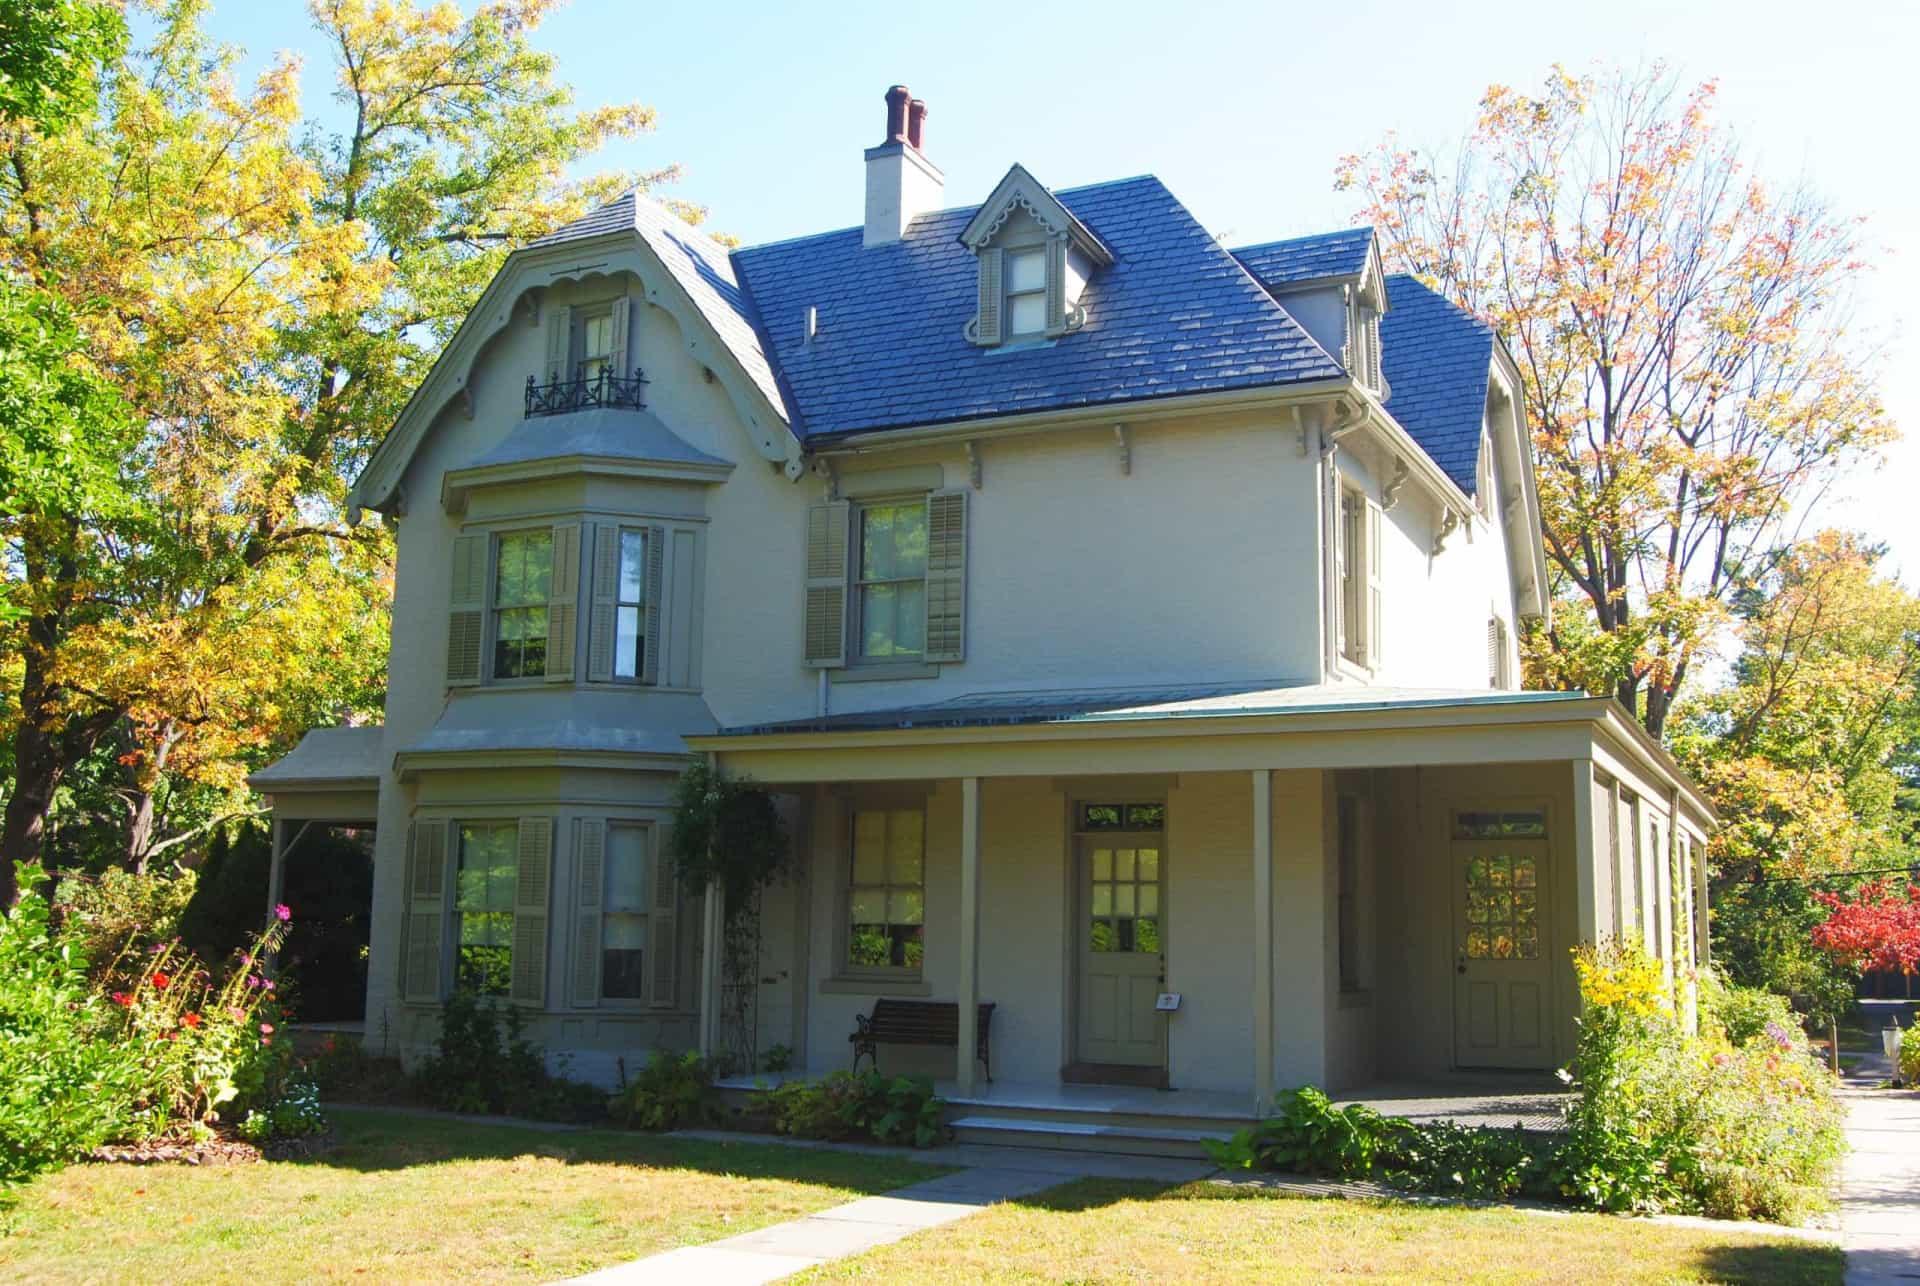 <p>Besides Mark Twain's house, book lovers can also seek out the Harriet Beecher Stowe House. Stowe is the author of the 1852 anti-slavery novel 'Uncle Tom's Cabin.' She lived in this house for the last 23 years of her life. The property is also open to the public.</p><p><a href="https://www.msn.com/en-us/community/channel/vid-7xx8mnucu55yw63we9va2gwr7uihbxwc68fxqp25x6tg4ftibpra?cvid=94631541bc0f4f89bfd59158d696ad7e">Follow us and access great exclusive content everyday</a></p>